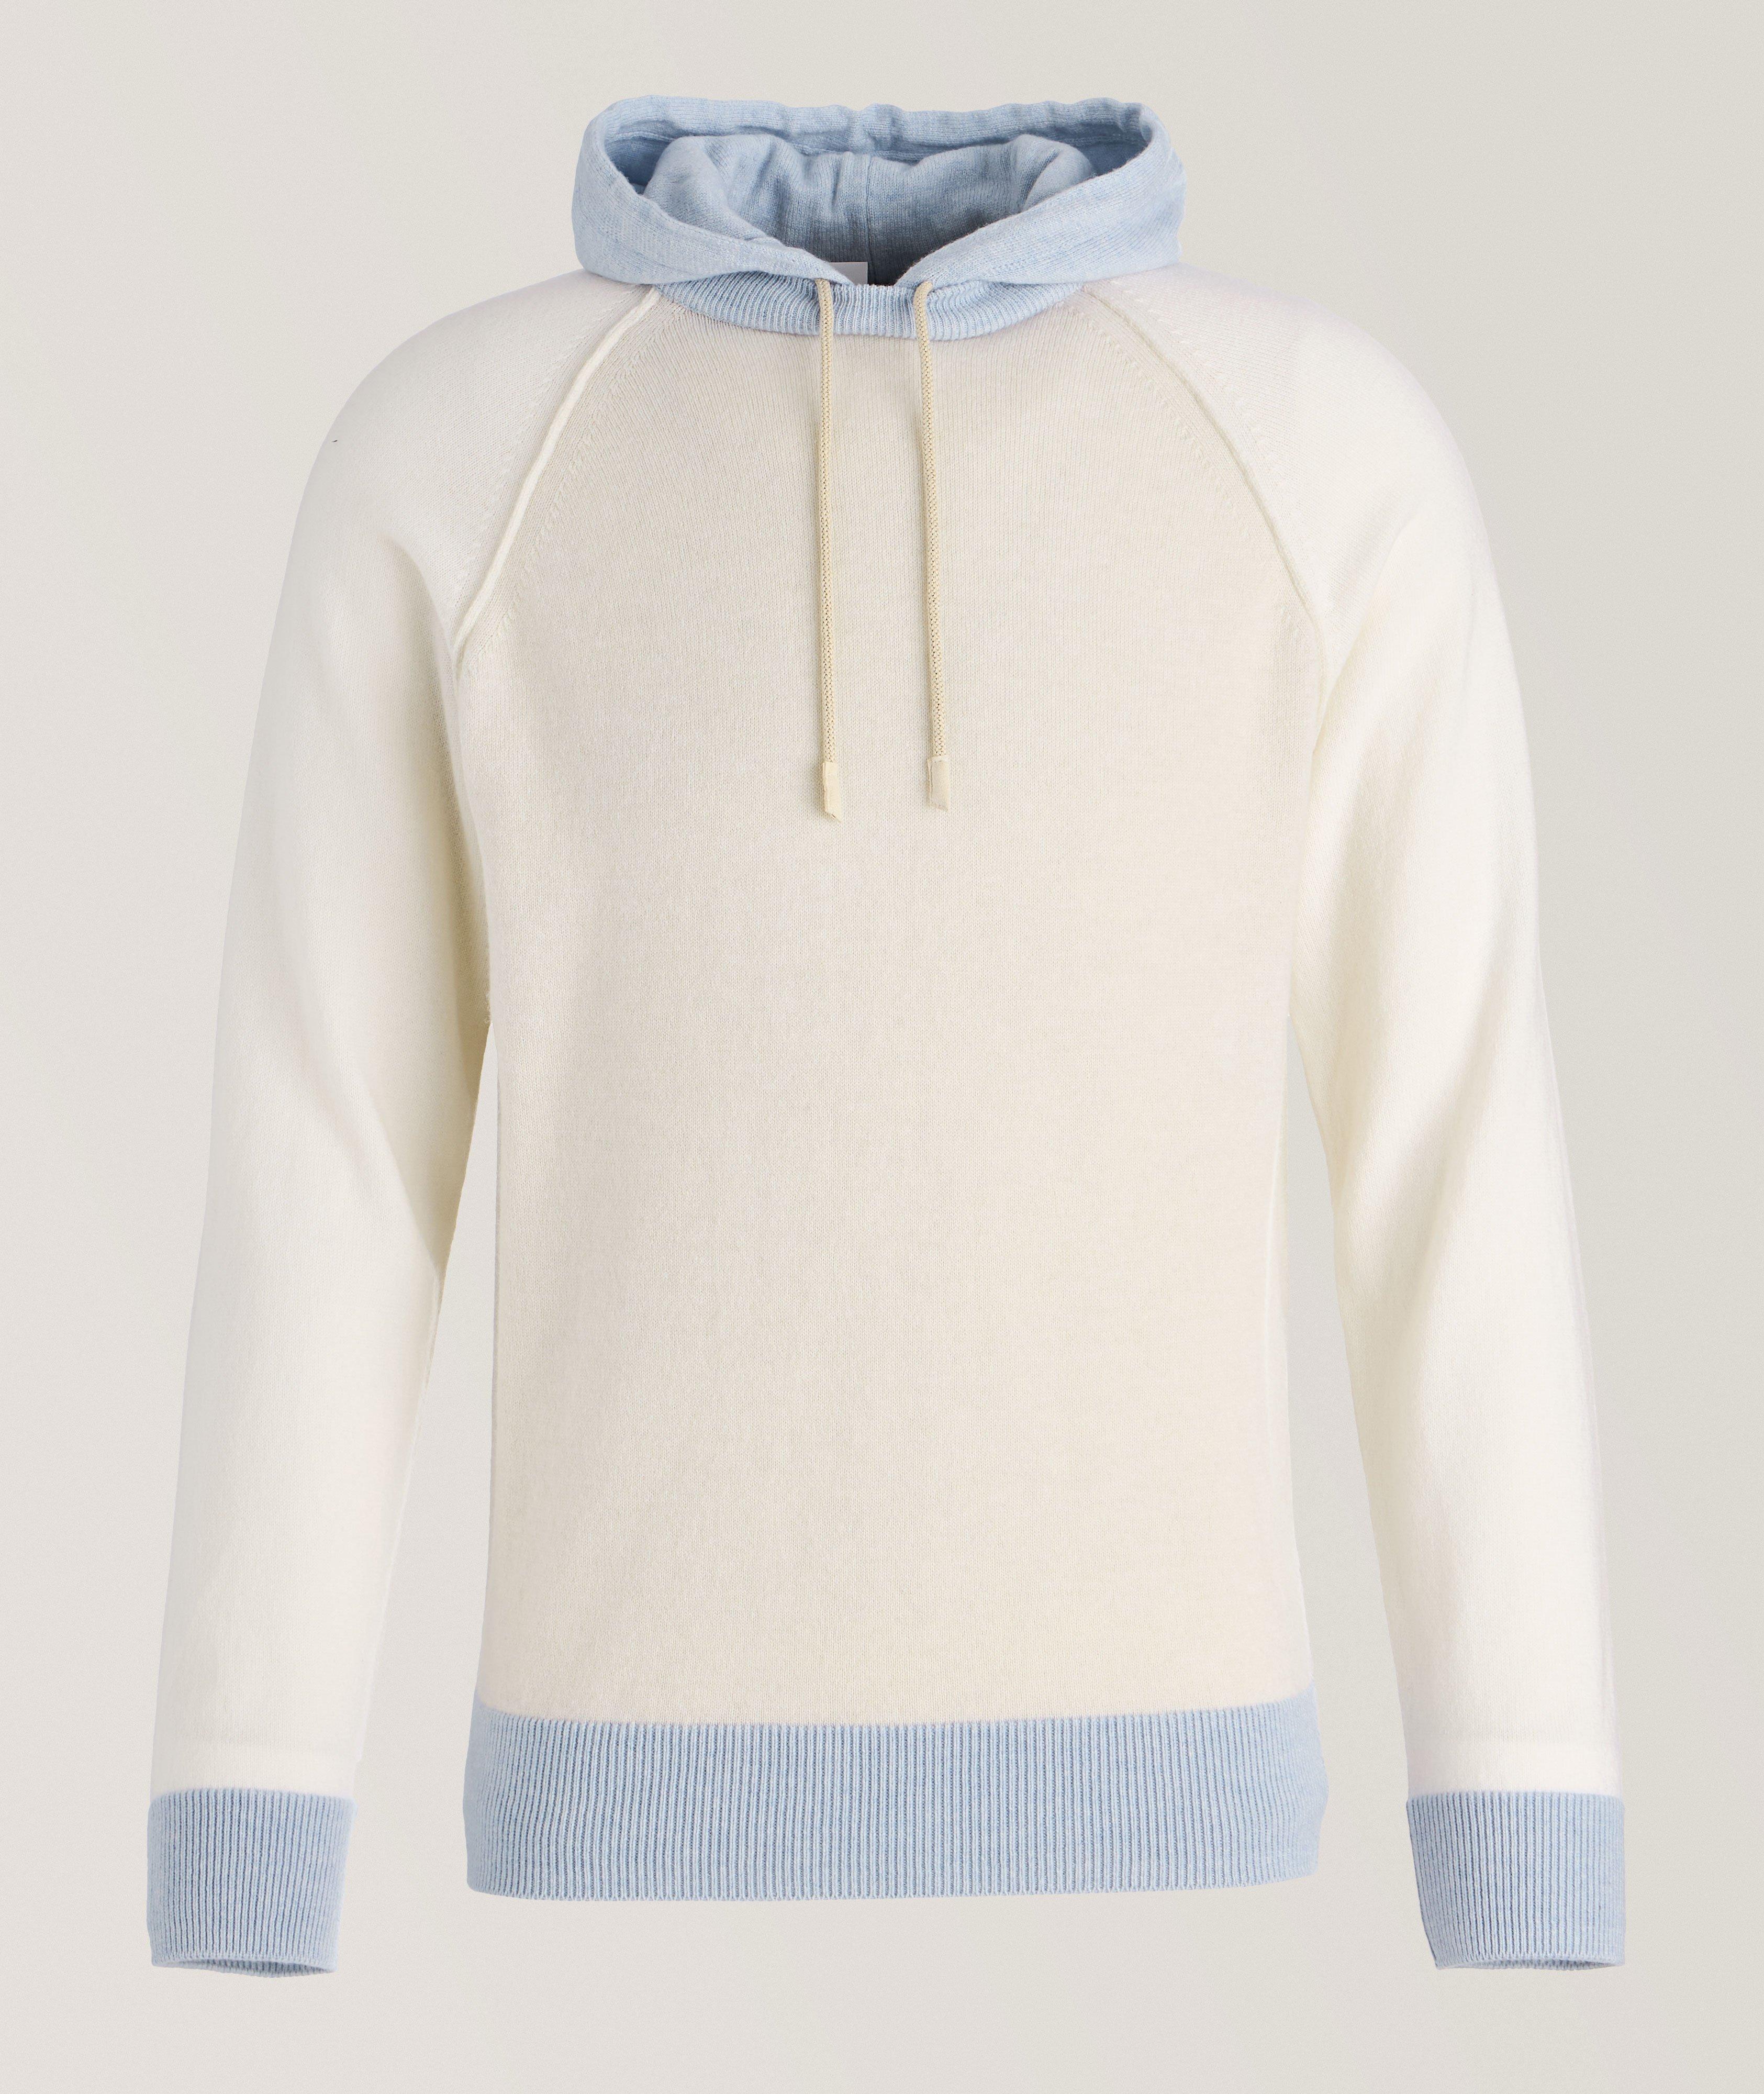 Colourblock Cashmere Hooded Sweater image 0